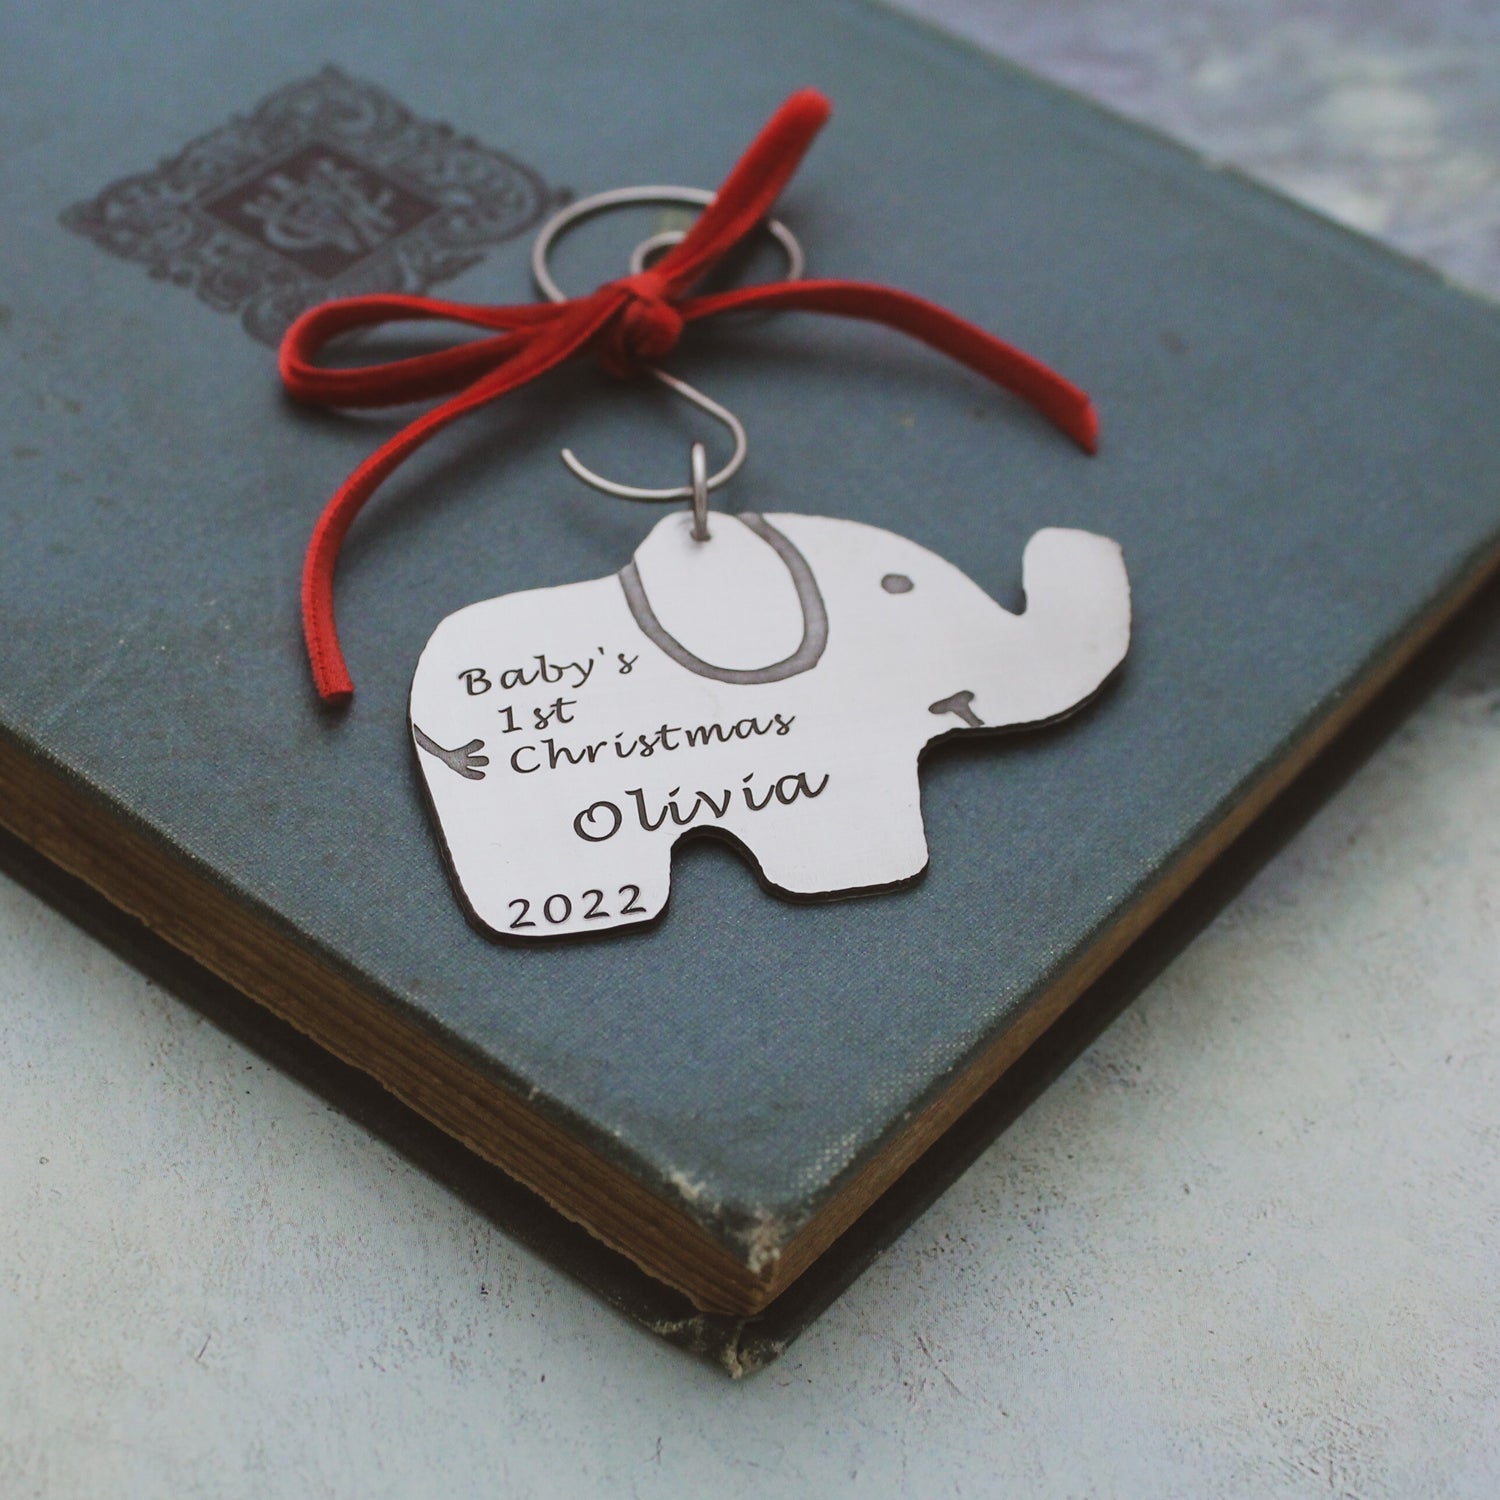 Personalized Baby's First Christmas Ornament, Elephant Christmas Ornament, New Baby Gift, Baby Gift, Personalized Hand Stamped Aluminum